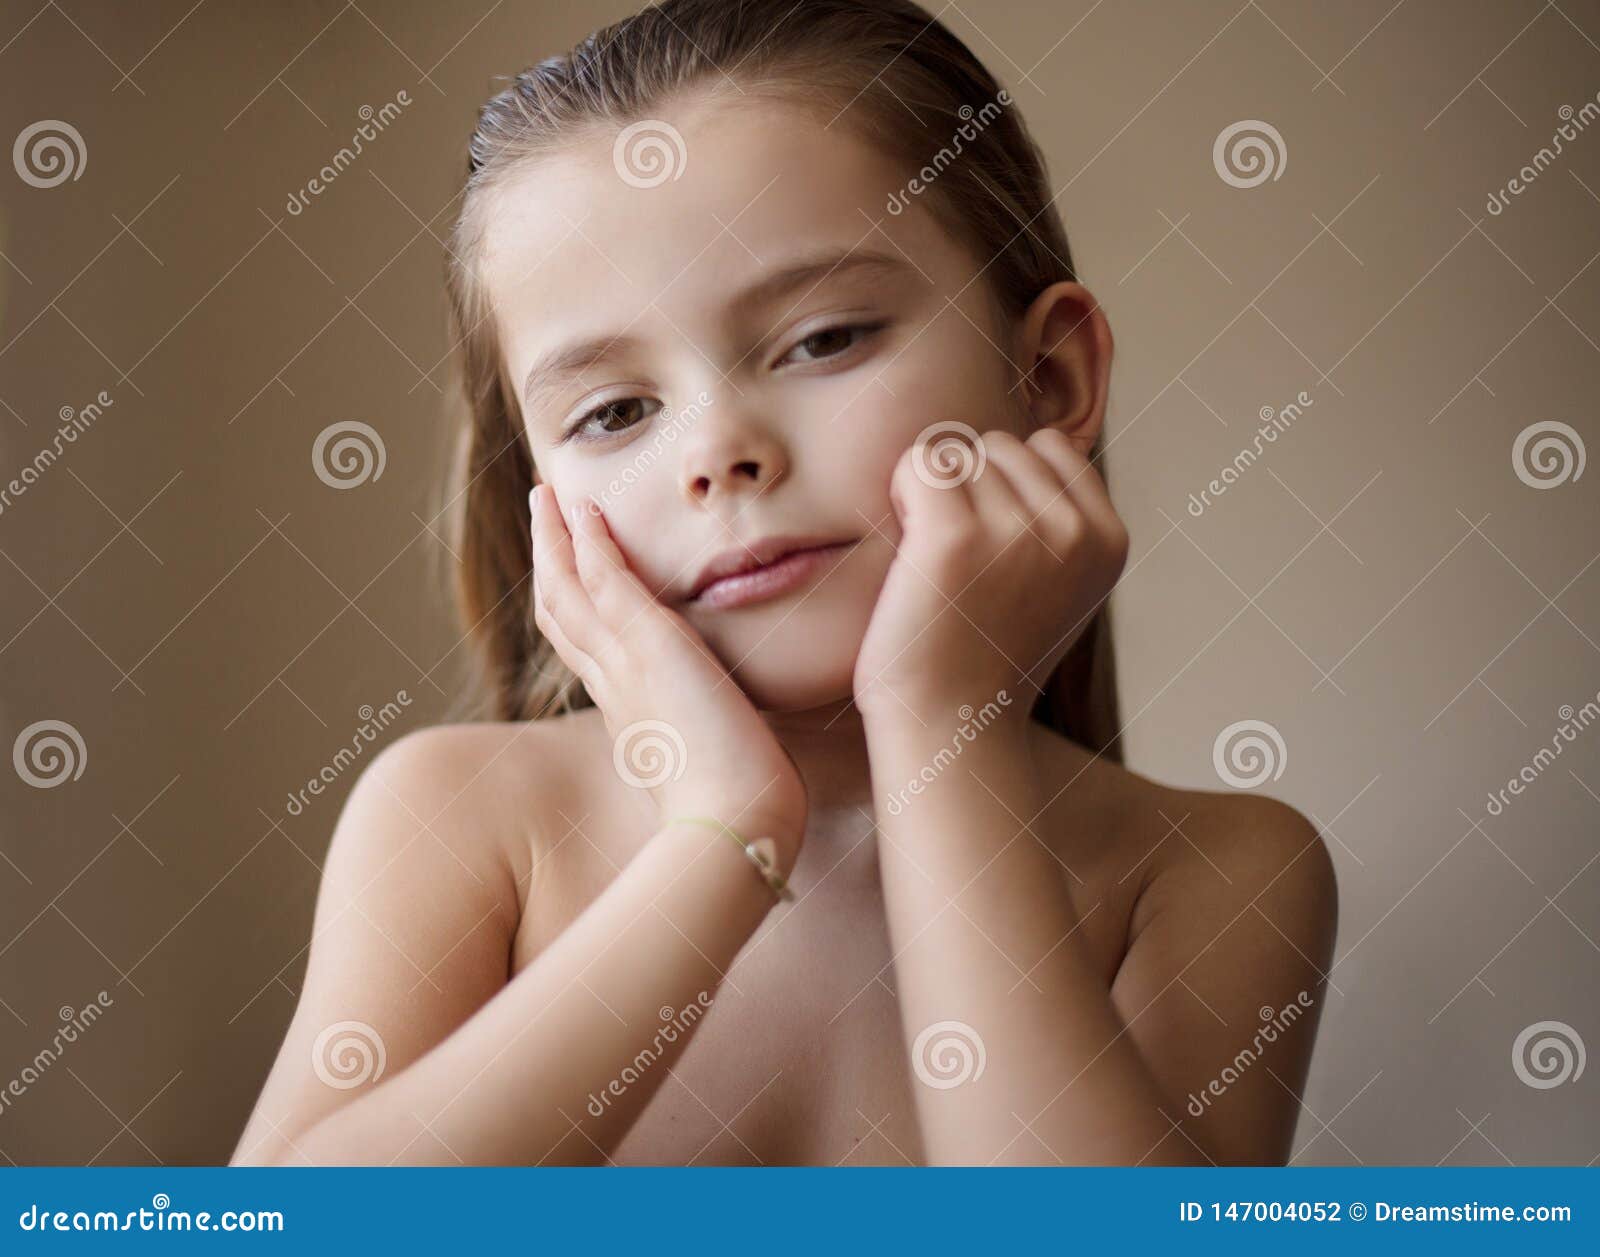 Grow Up In A Beautiful Girl Stock Photo Image Of People Girls